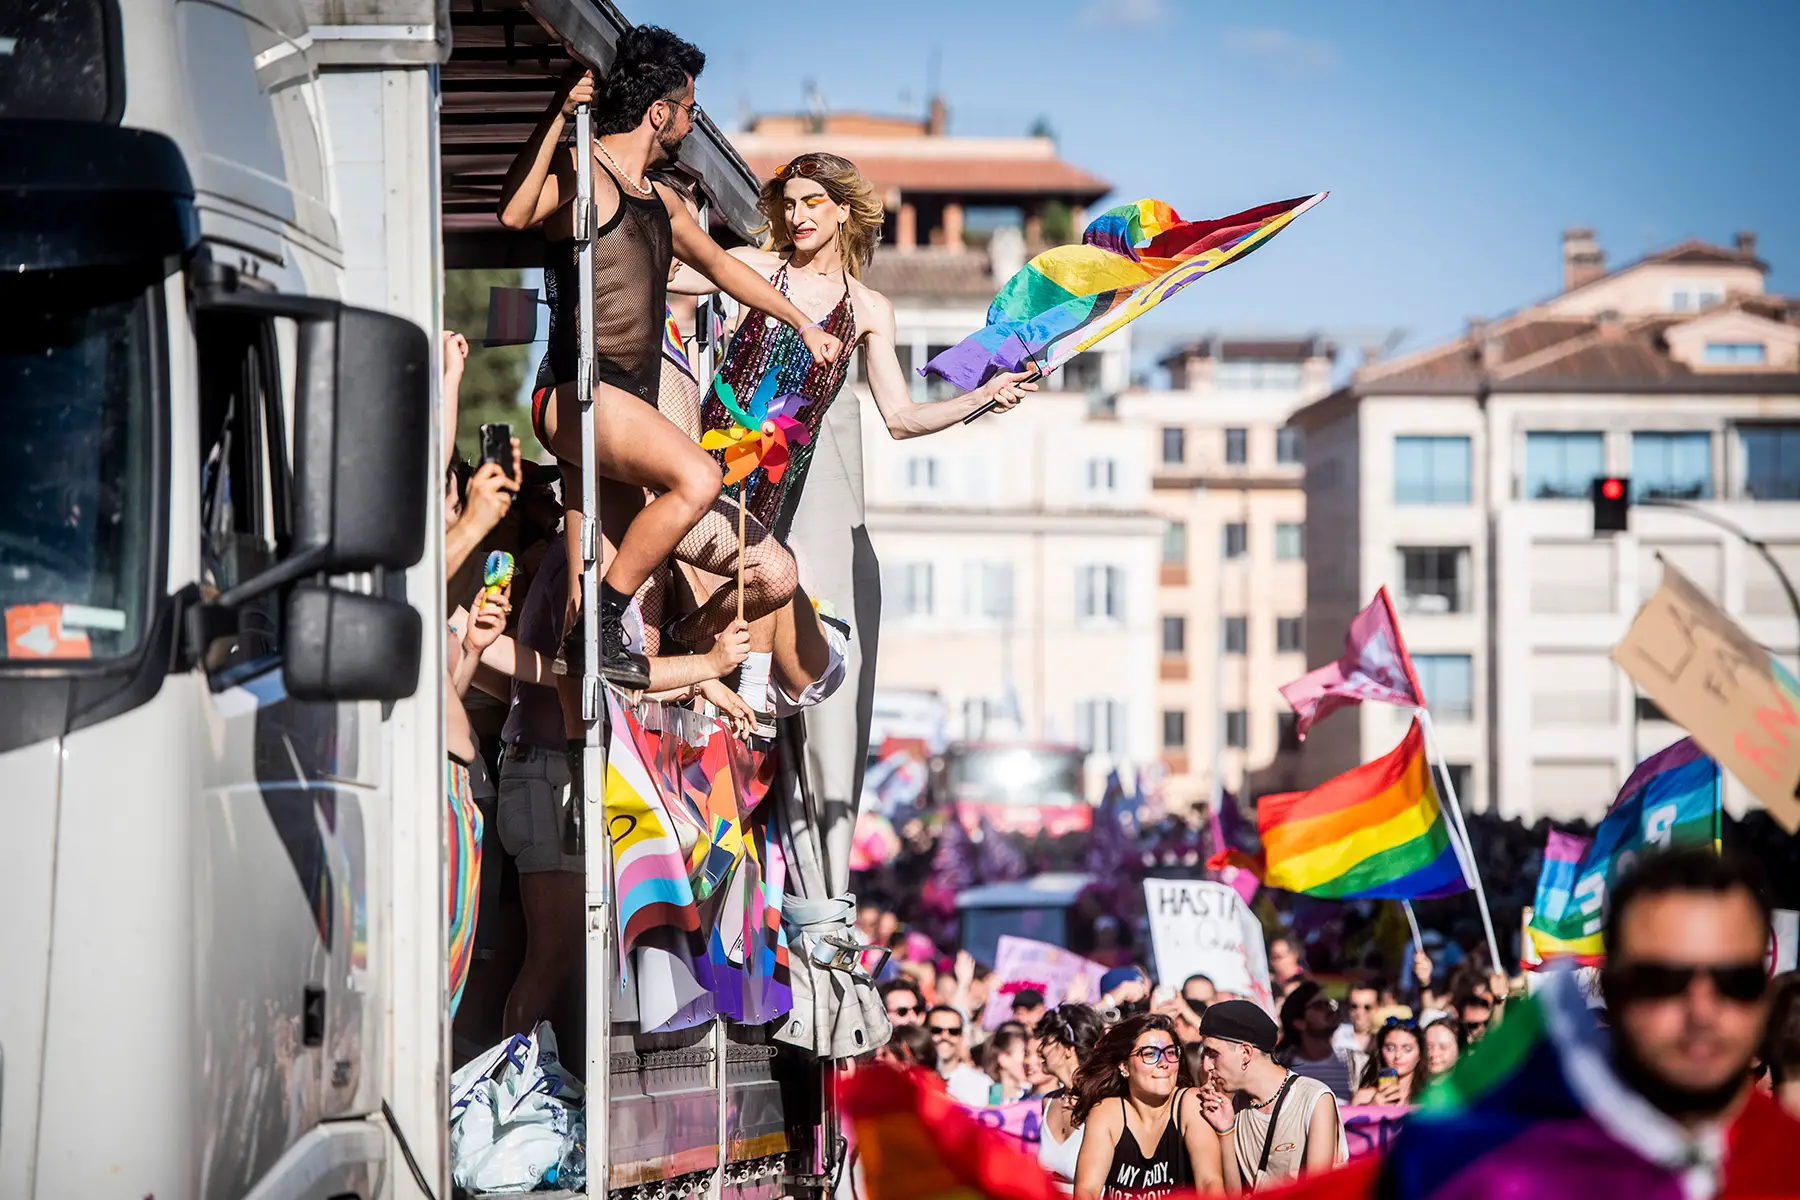 People celebrating with rainbow flags, hanging out of an open truck